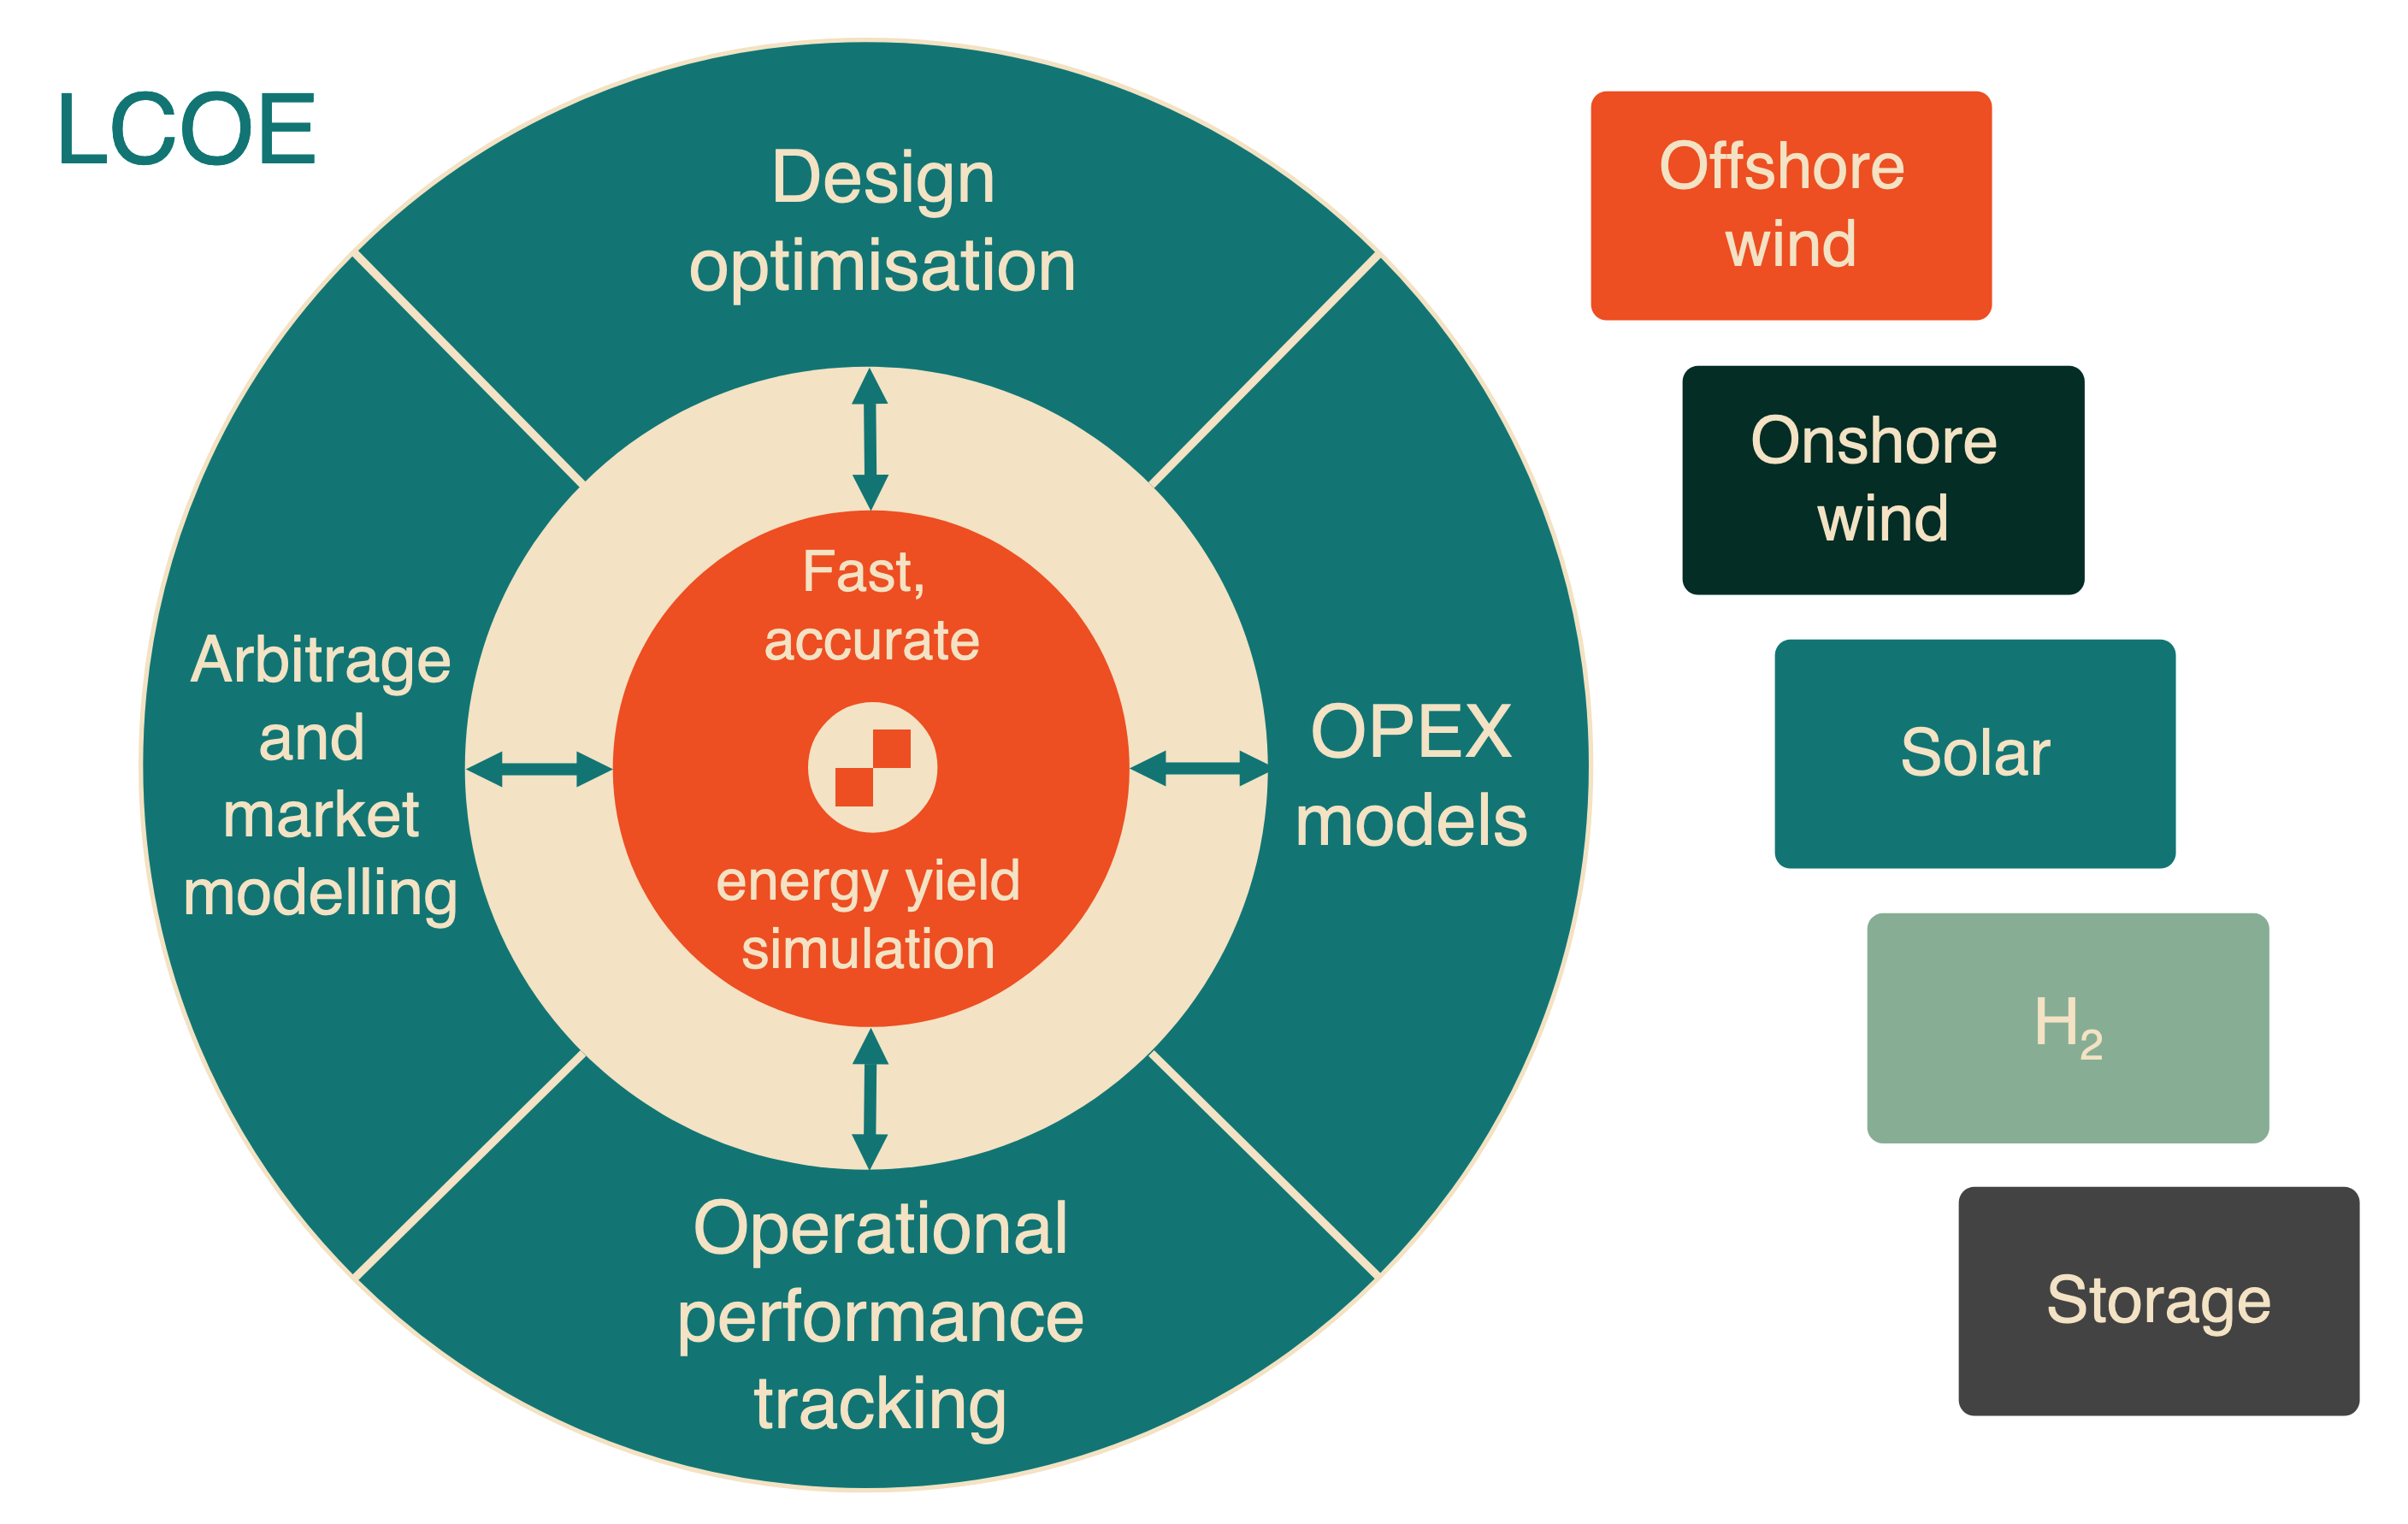 Graphic demonstrating Boxkite's fast accurate energy yield simulation contributes to LCOE via links to design optimisation, arbitrage, performance tracking and OPEX models.